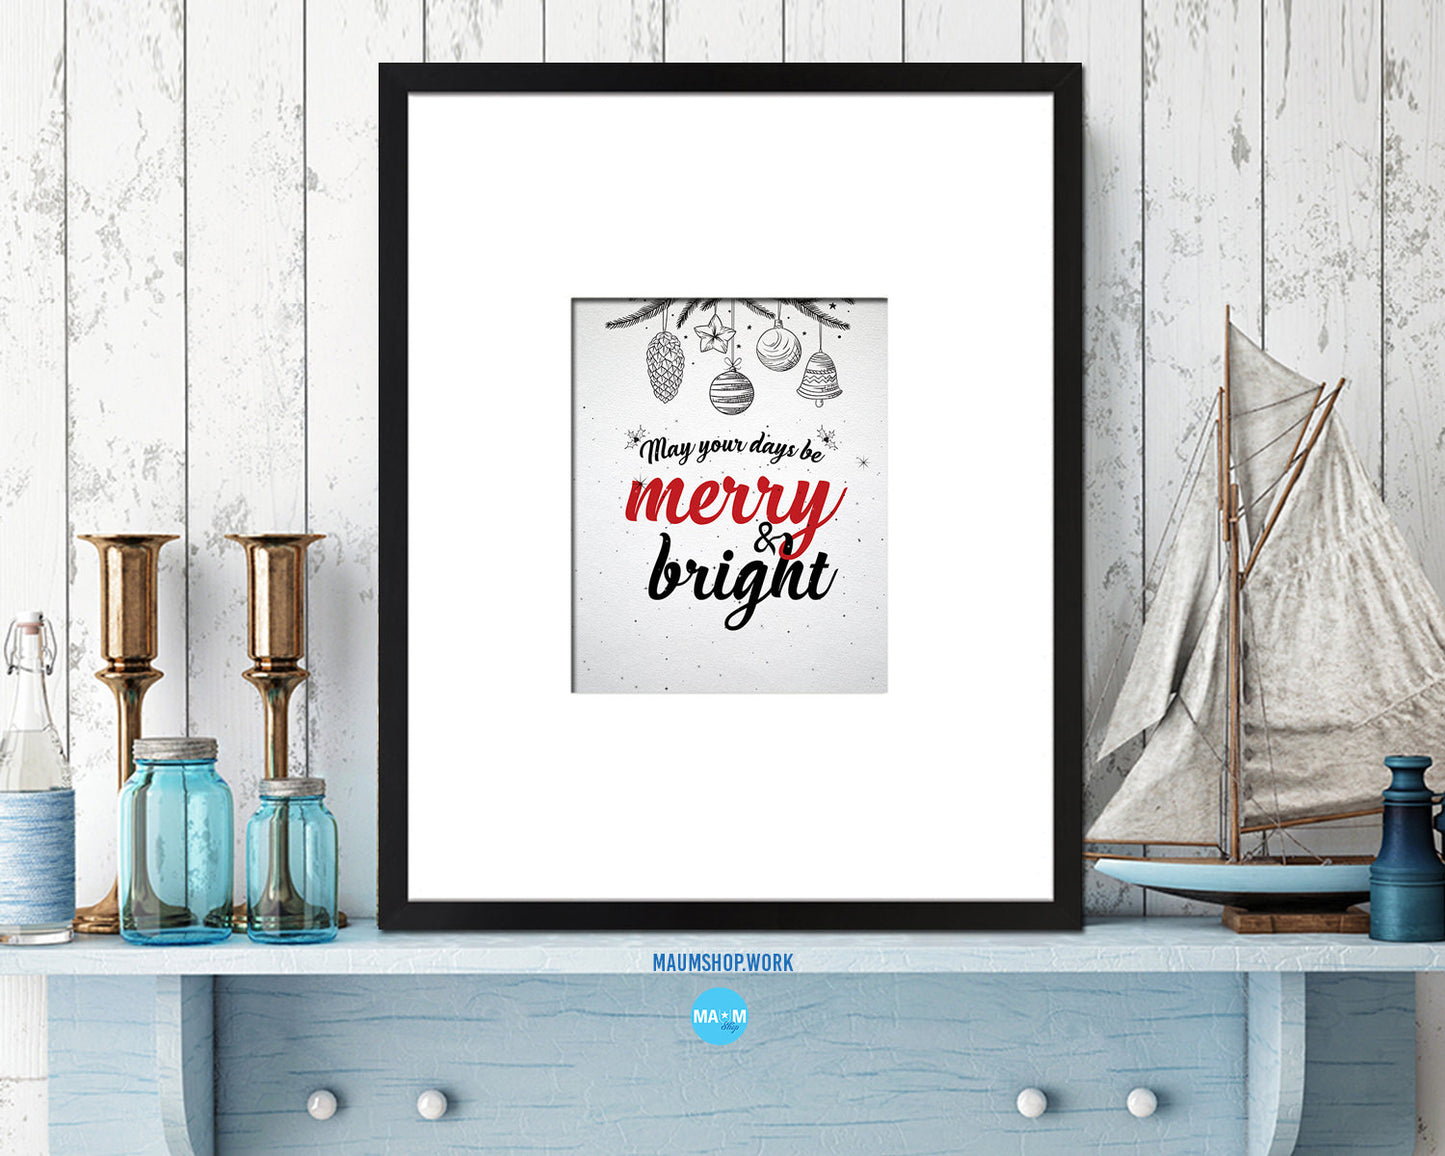 May your days be merry and bright Holiday Season Gifts Wood Framed Print Home Decor Wall Art